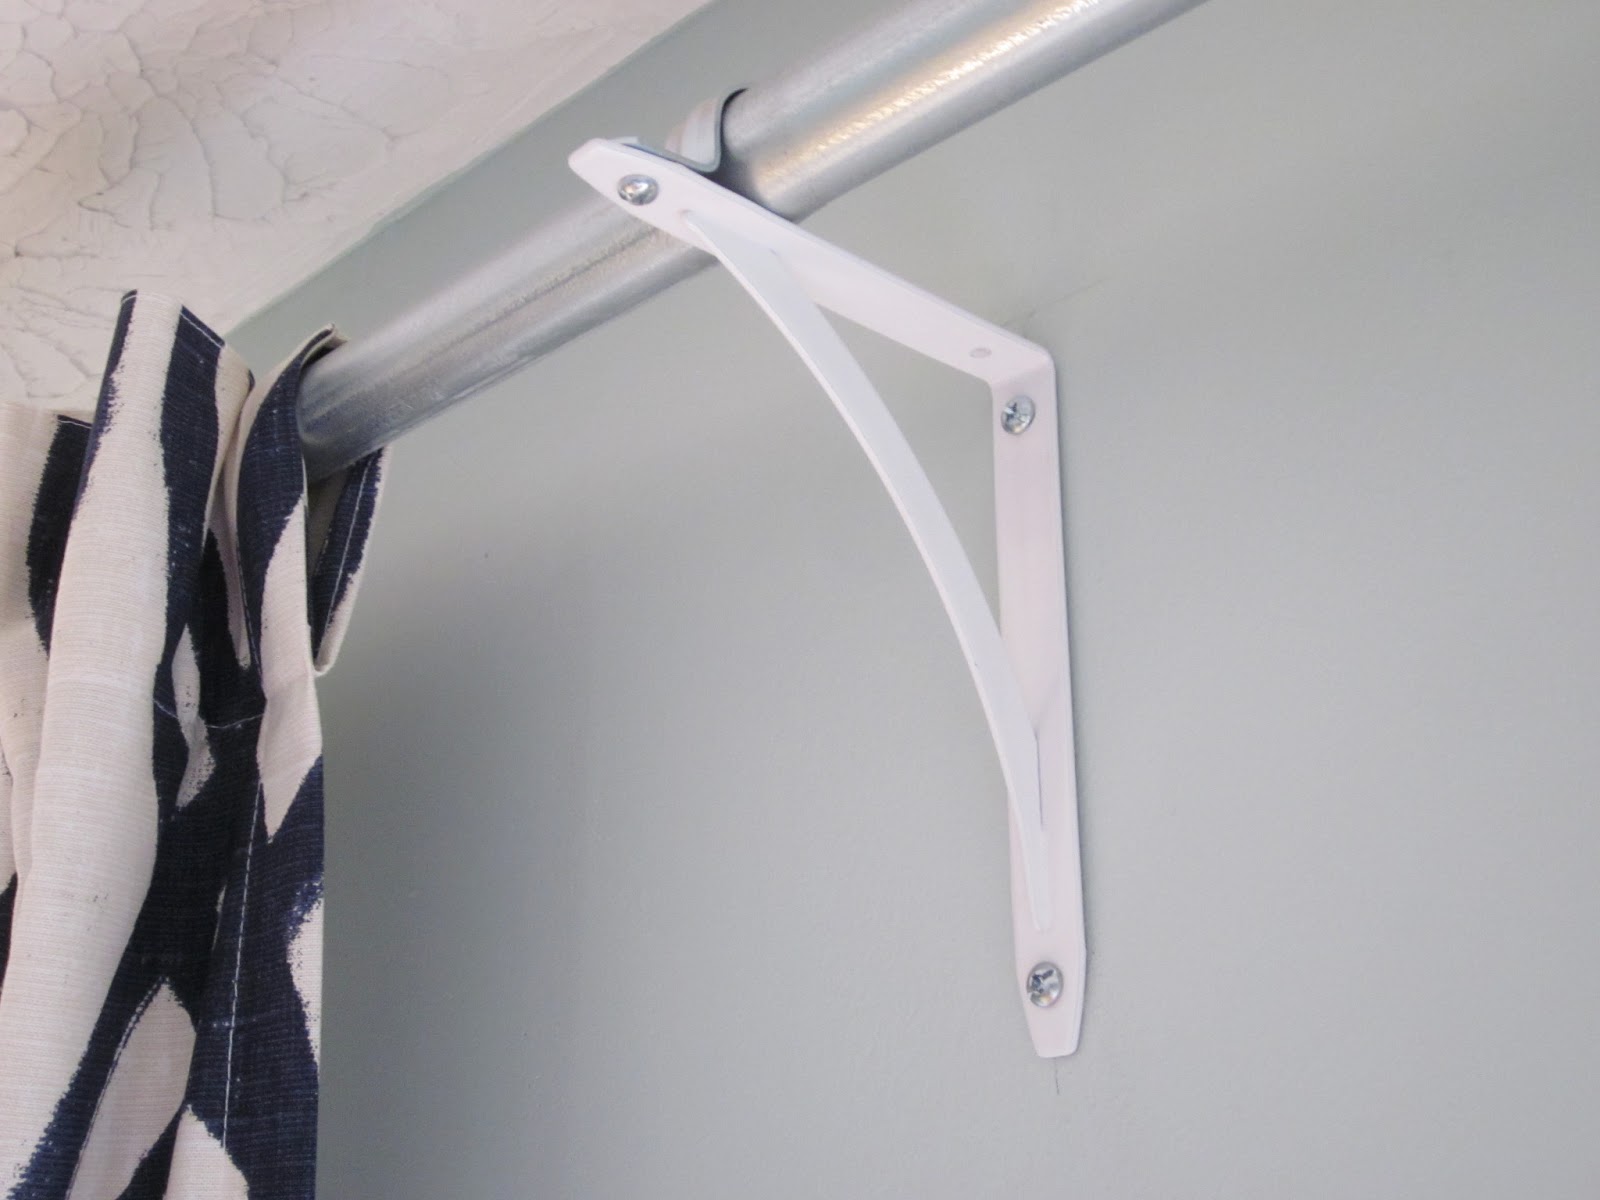 How To Clean A Shower Curtain 1 1 4 Curtain Rod Brackets